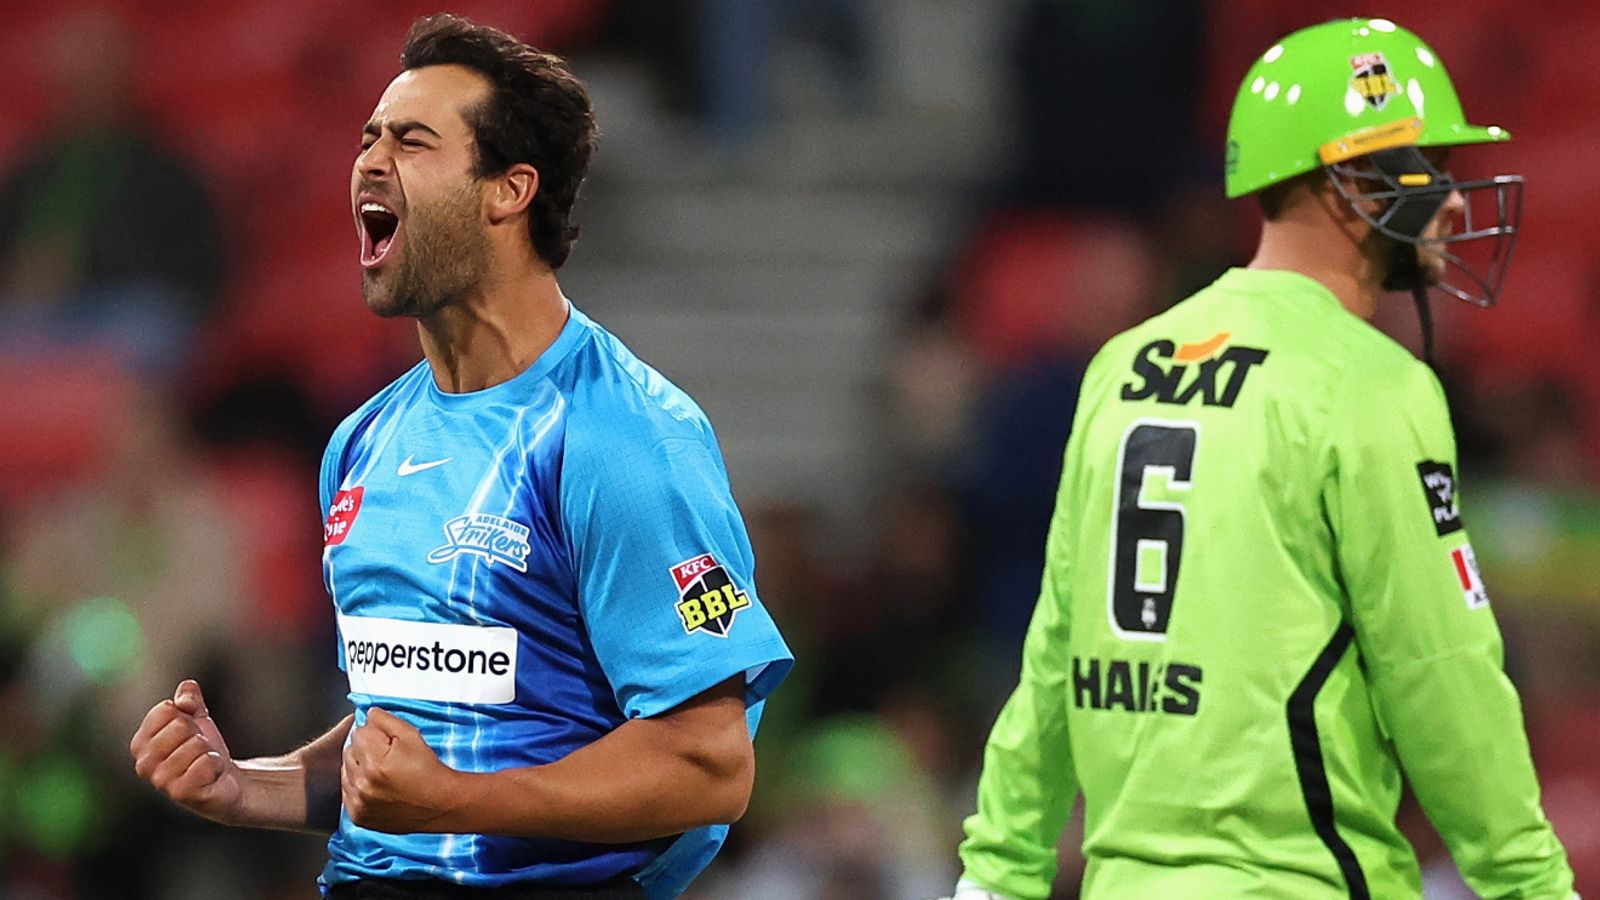 15 all out! Sydney Thunder bowled out in just 35 deliveries by Adelaide Strikers in Big Bash League | Cricket News